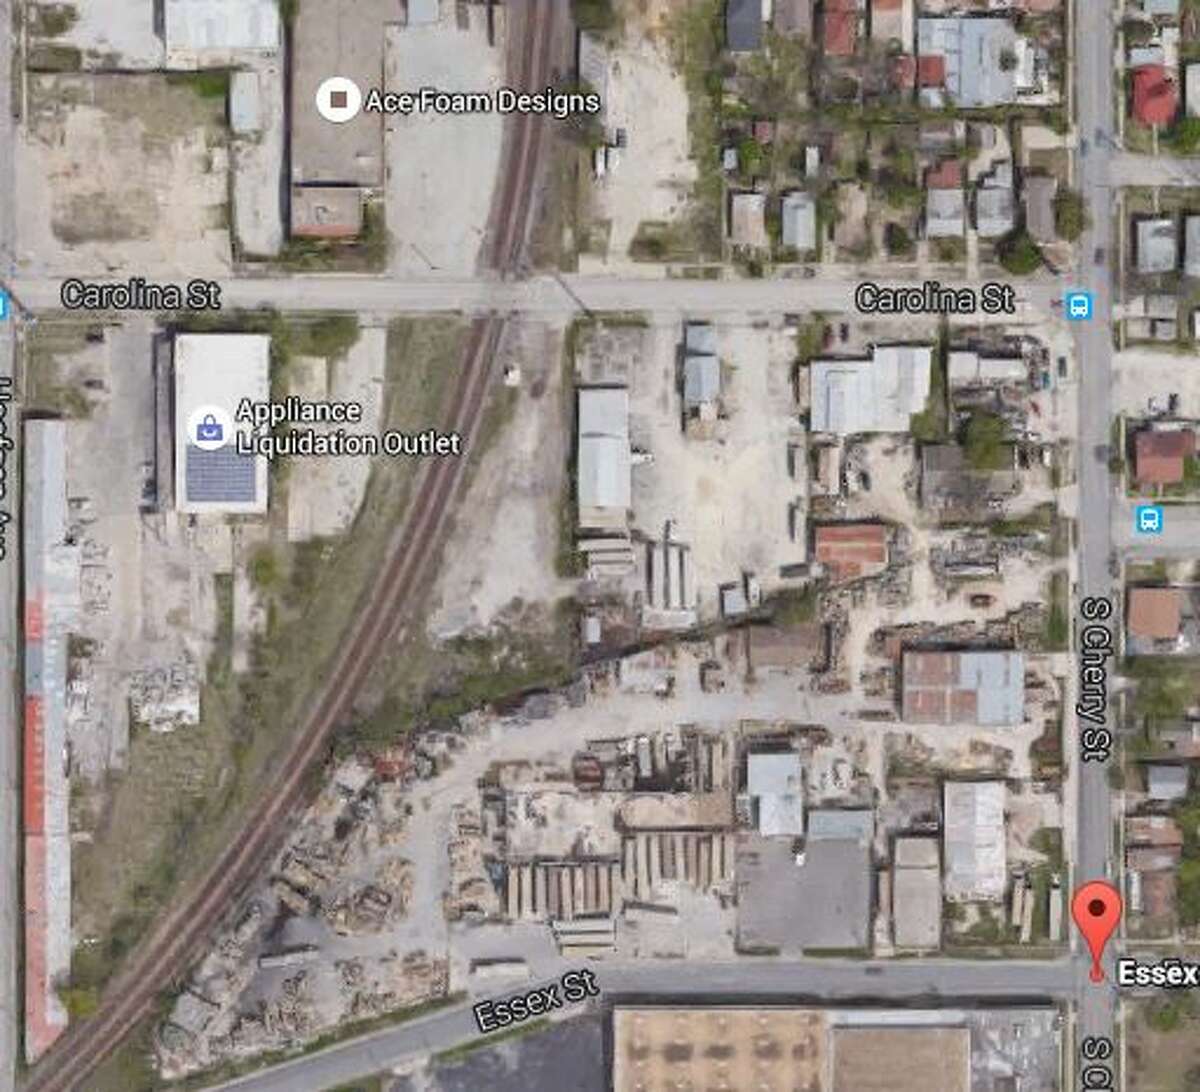 A screen shot from Google earth shows the area where Efraim Varga is planning a 7.7-acre mixed use development.